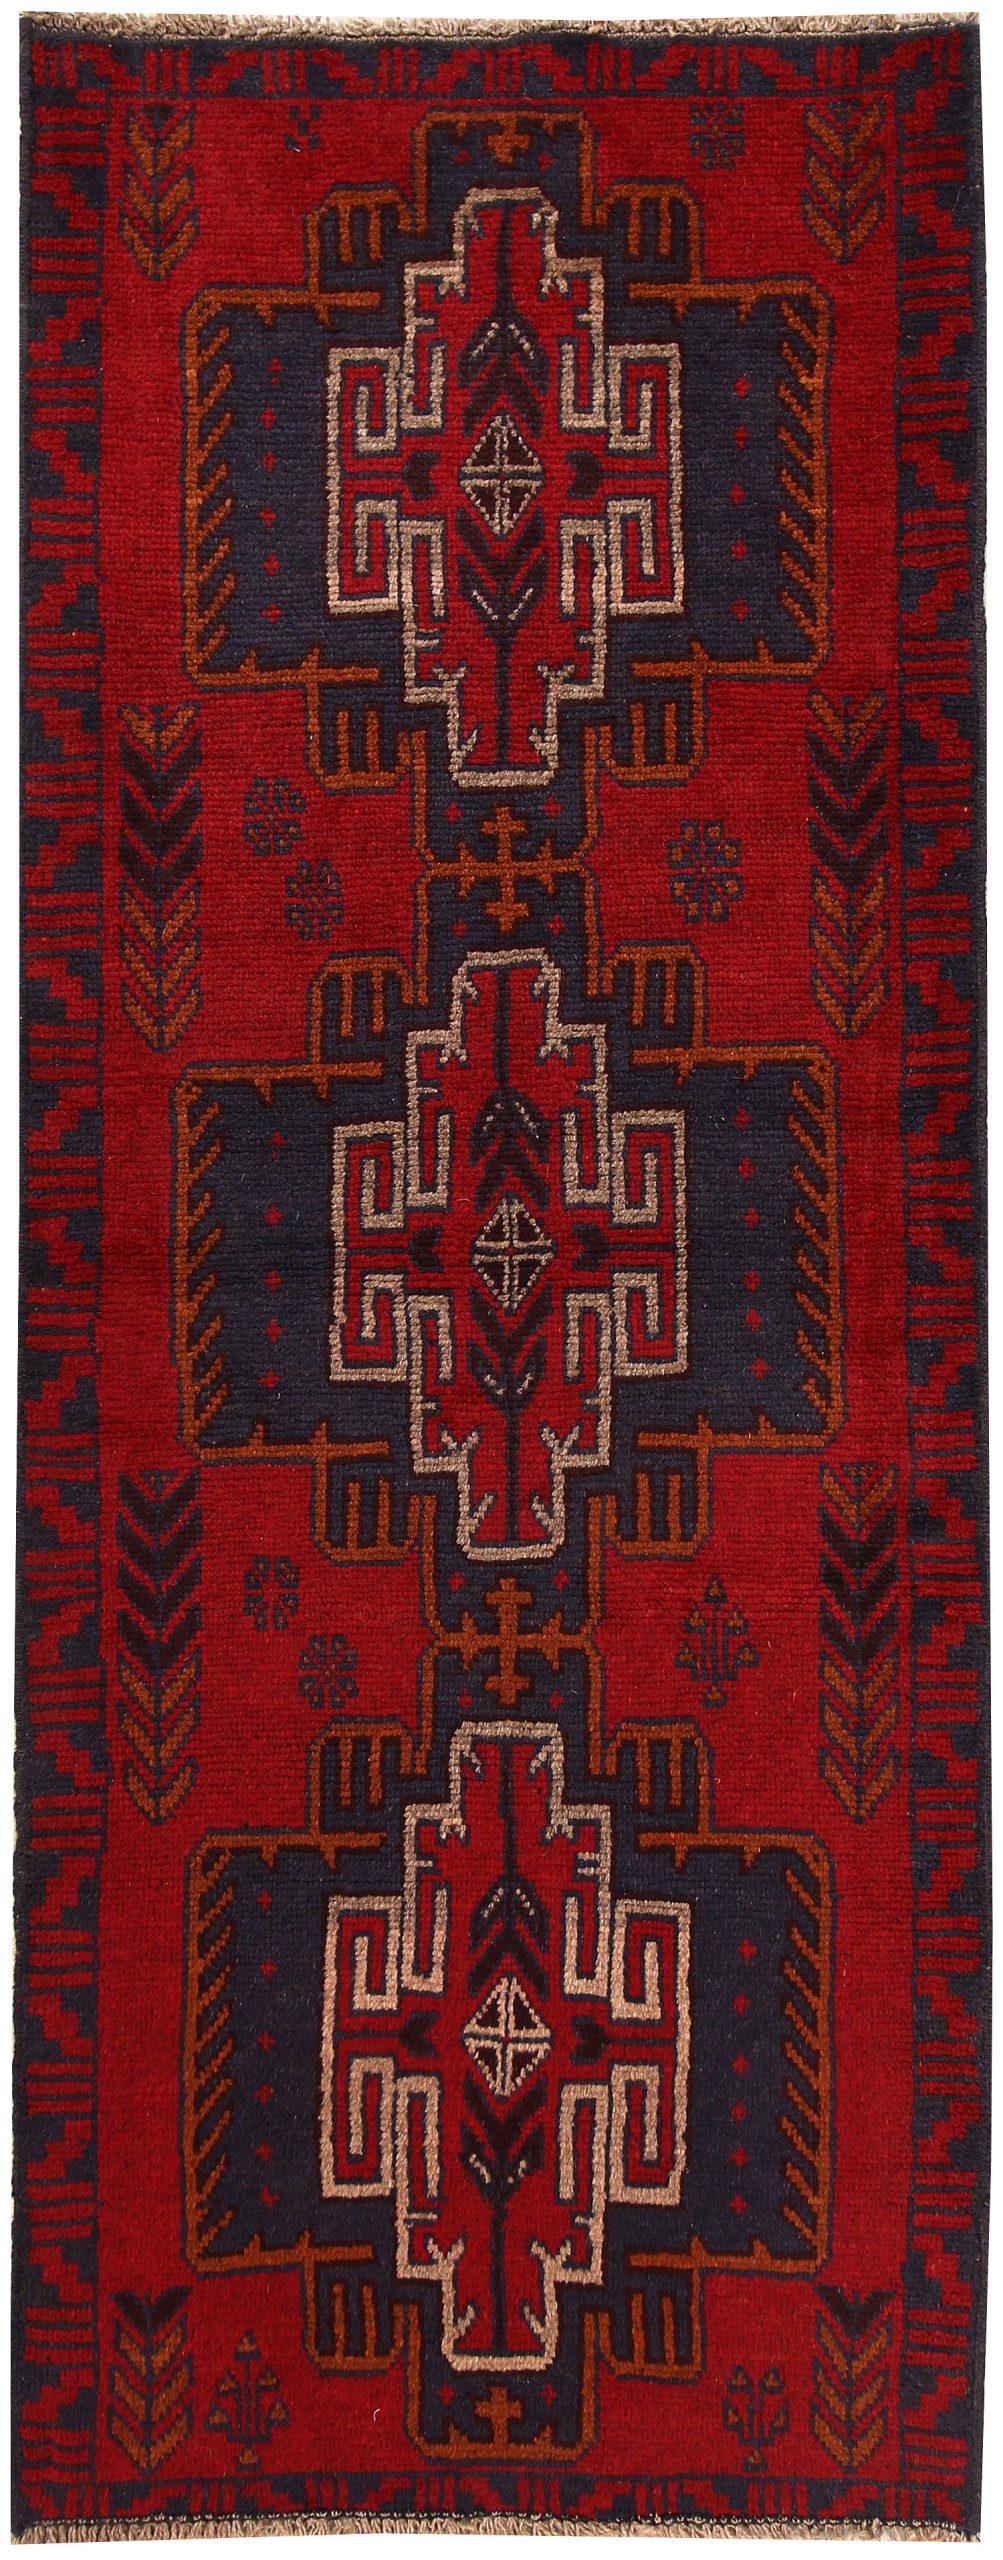 How To Tell An Authentic Afghan Rug